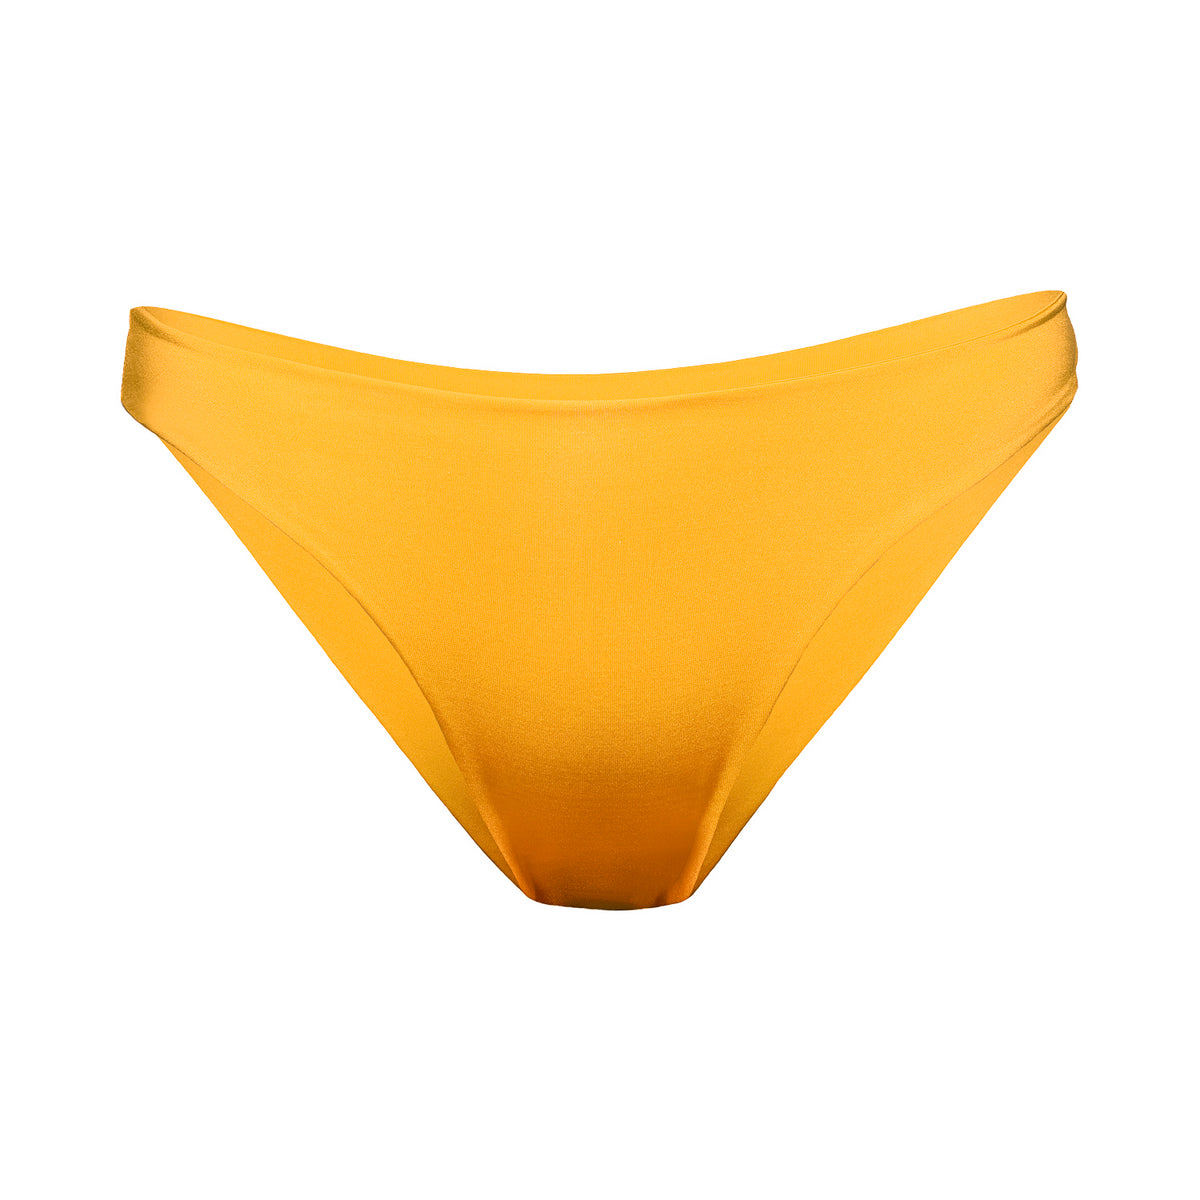 Citrus yellow classic bikini bottoms with an extra soft touch, fine lining and thick feel. Made sustainably and ethically in Europe from finest polyamide. Perfected fit for every body shape.